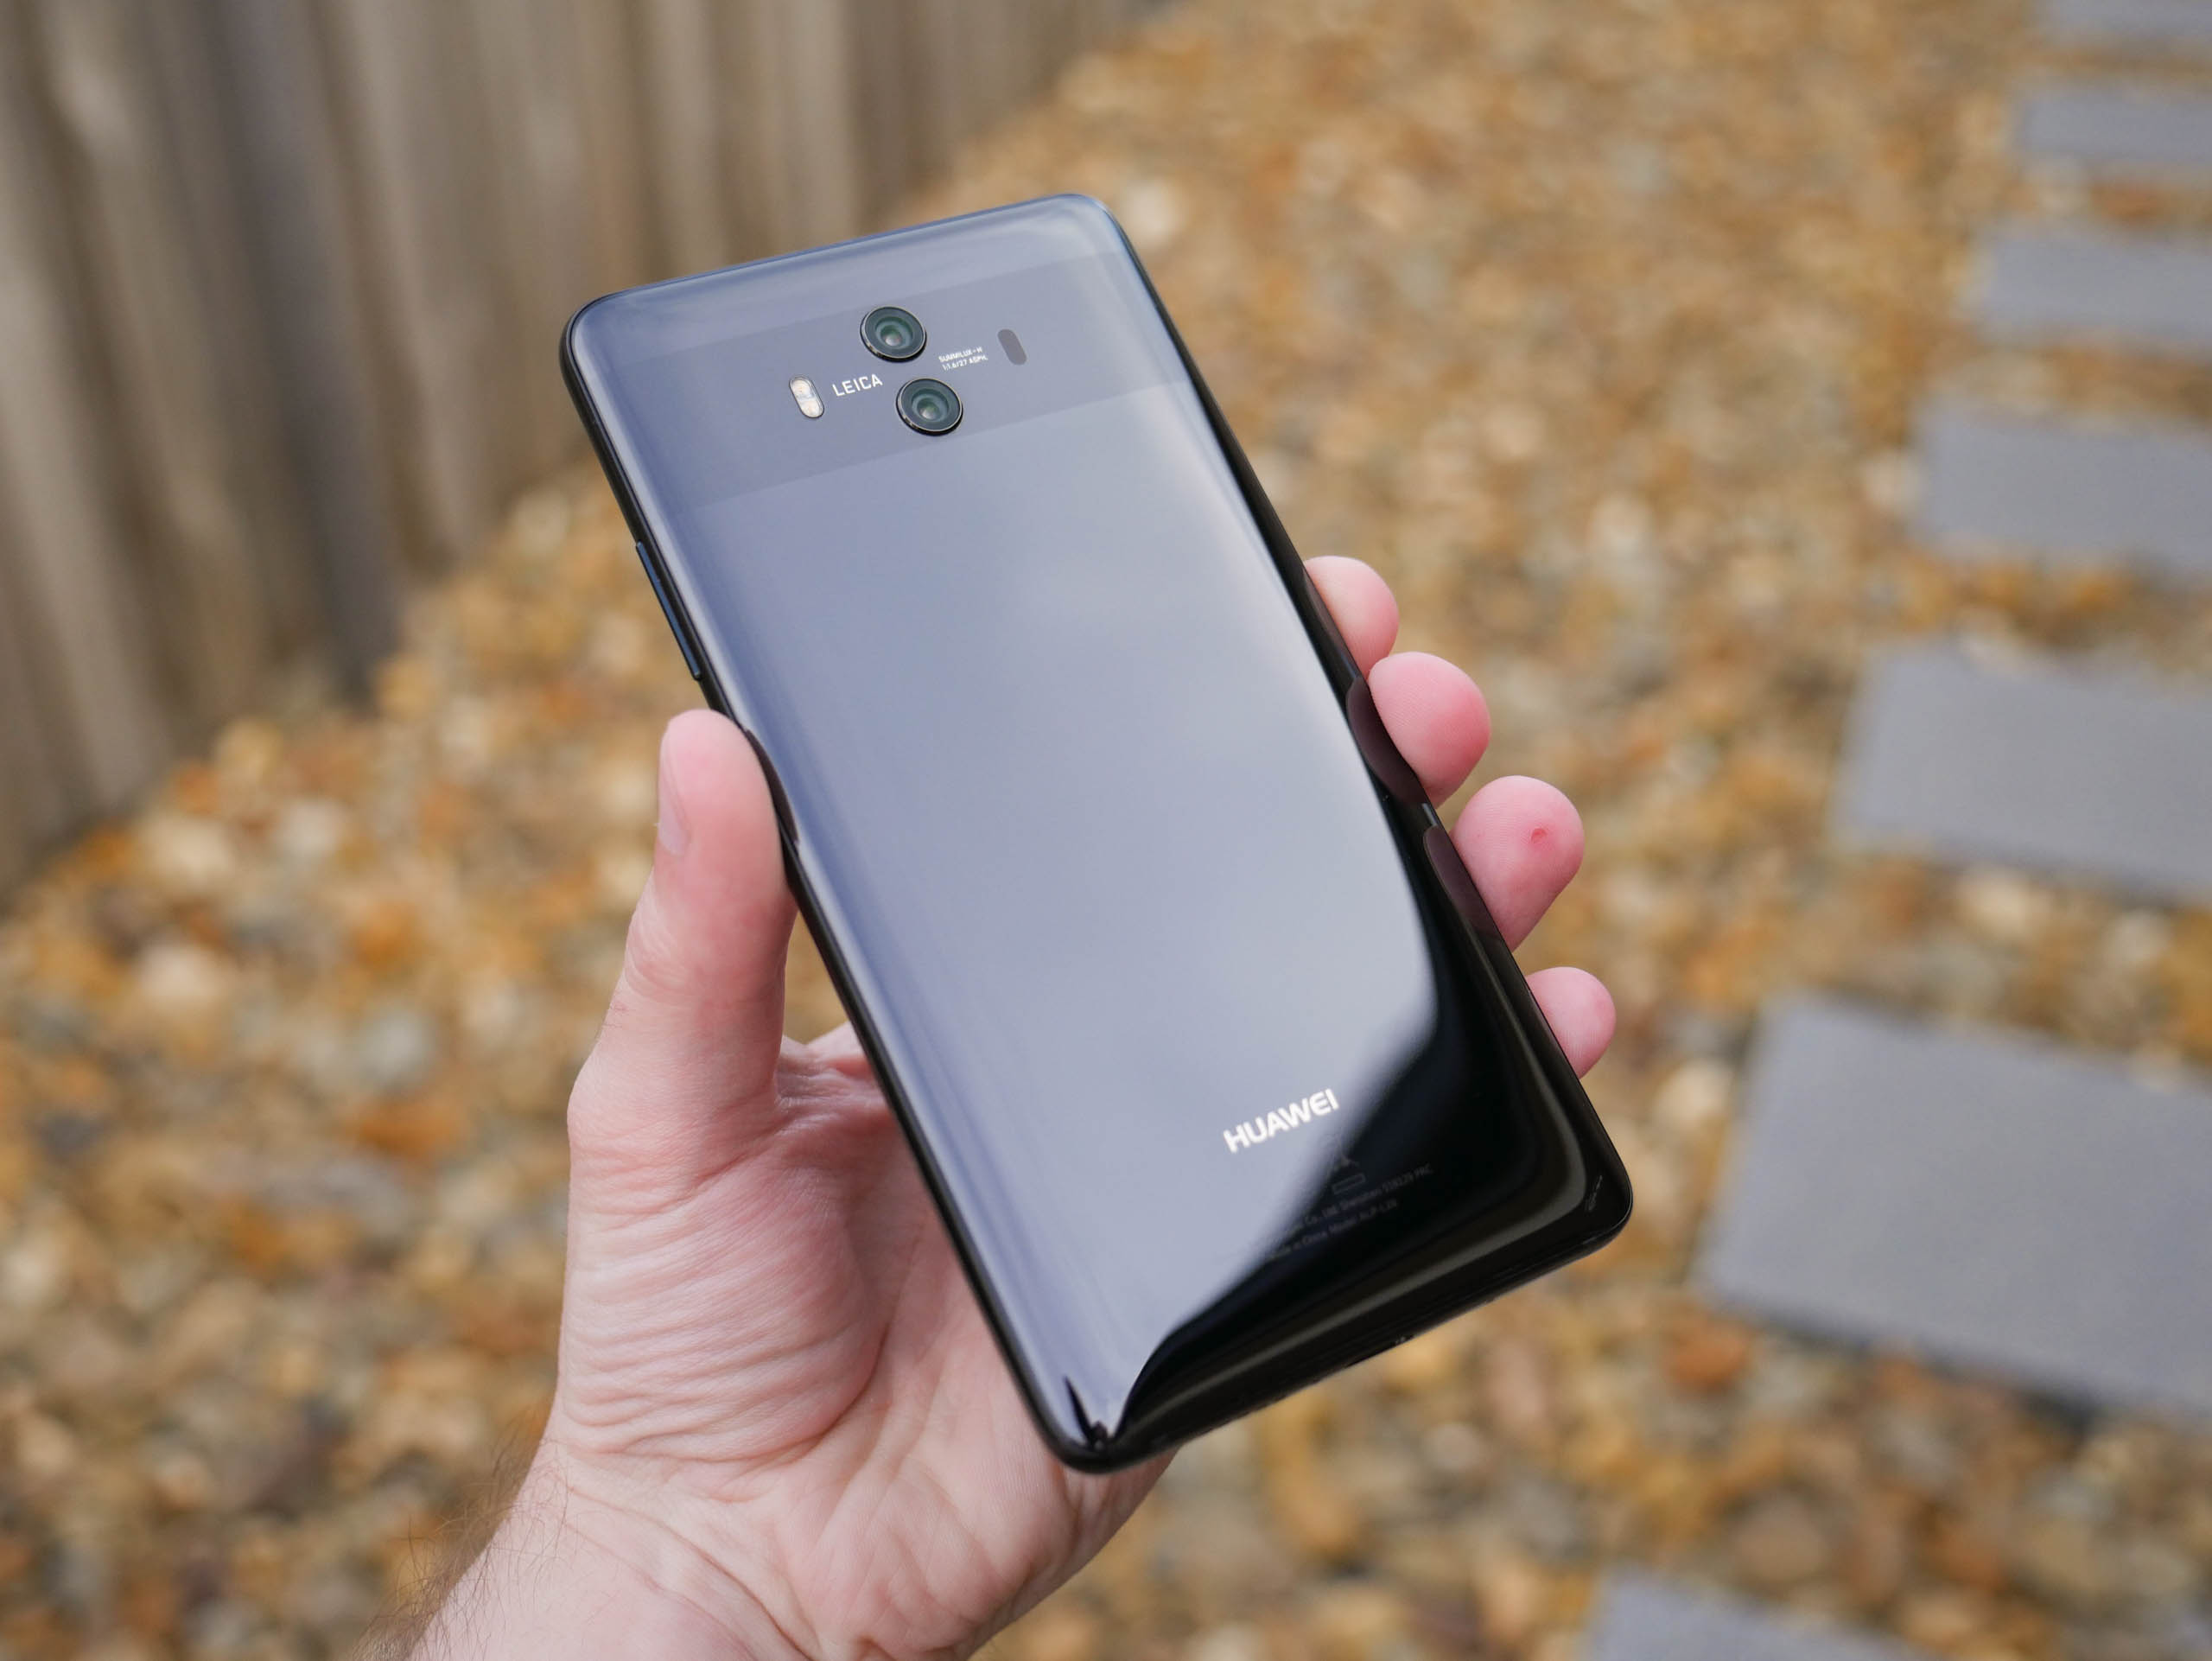 Huawei Mate 10 Review Photo Gallery - TechSpot